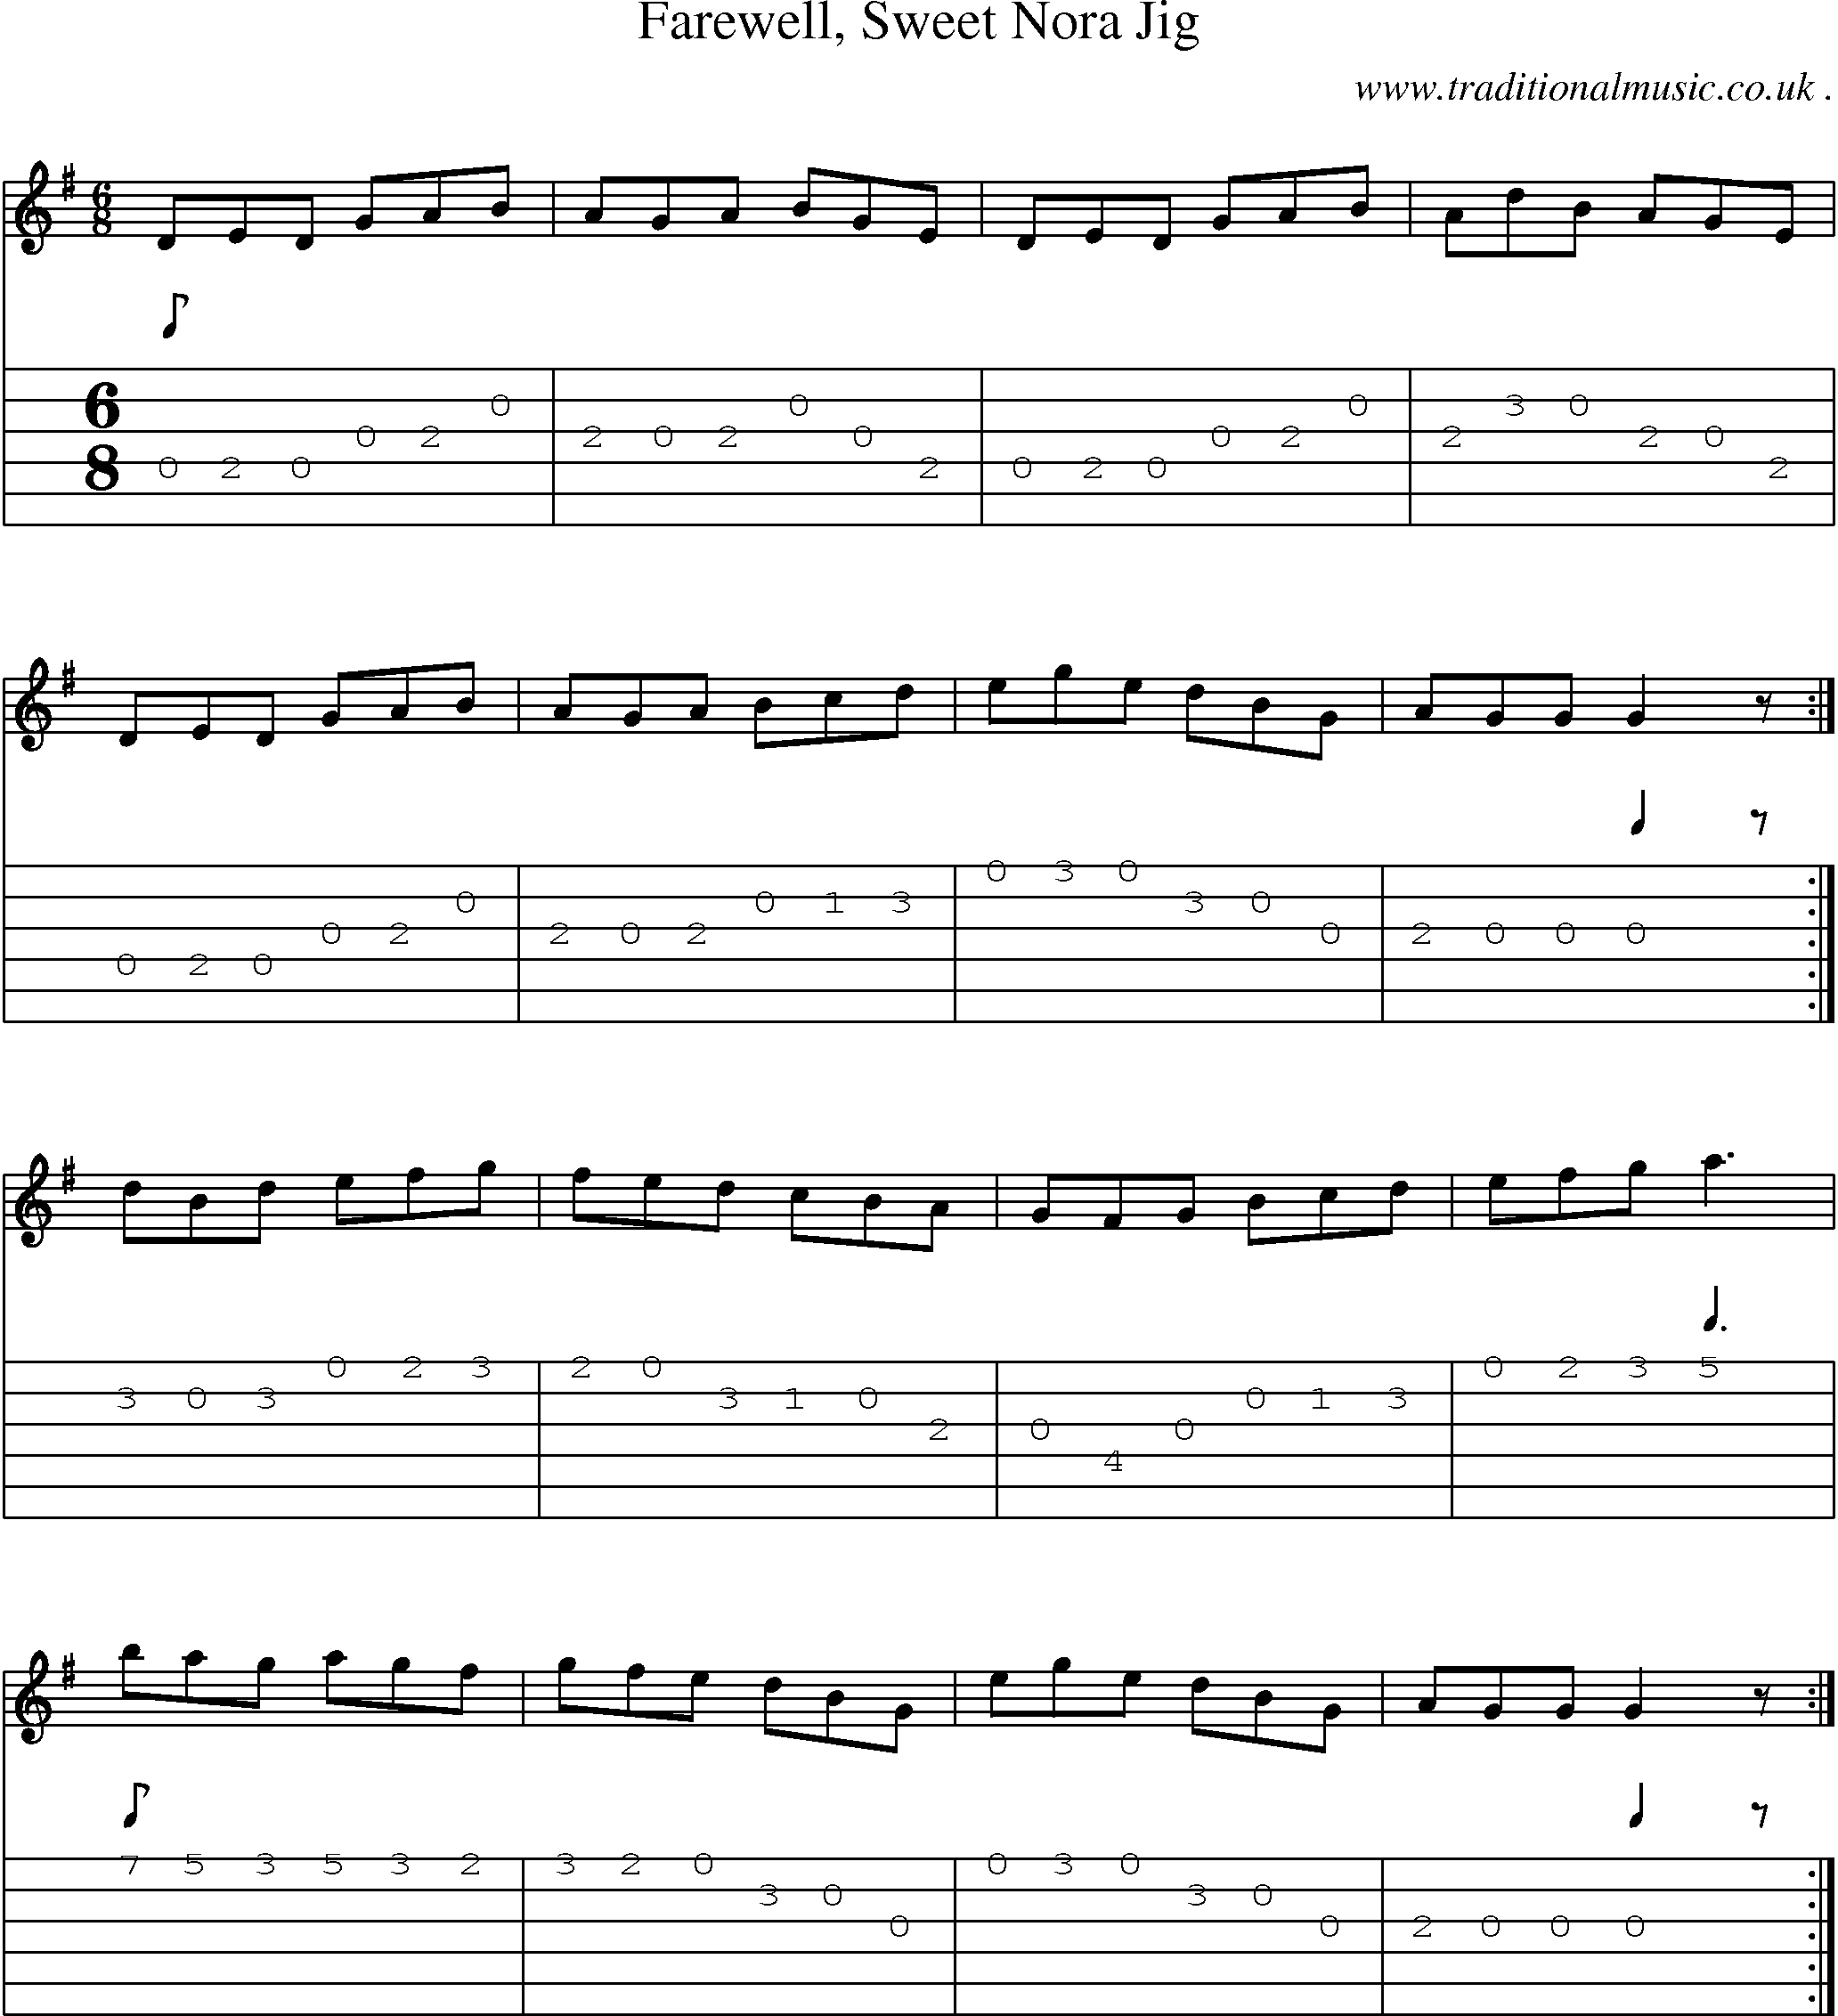 Sheet-Music and Guitar Tabs for Farewell Sweet Nora Jig